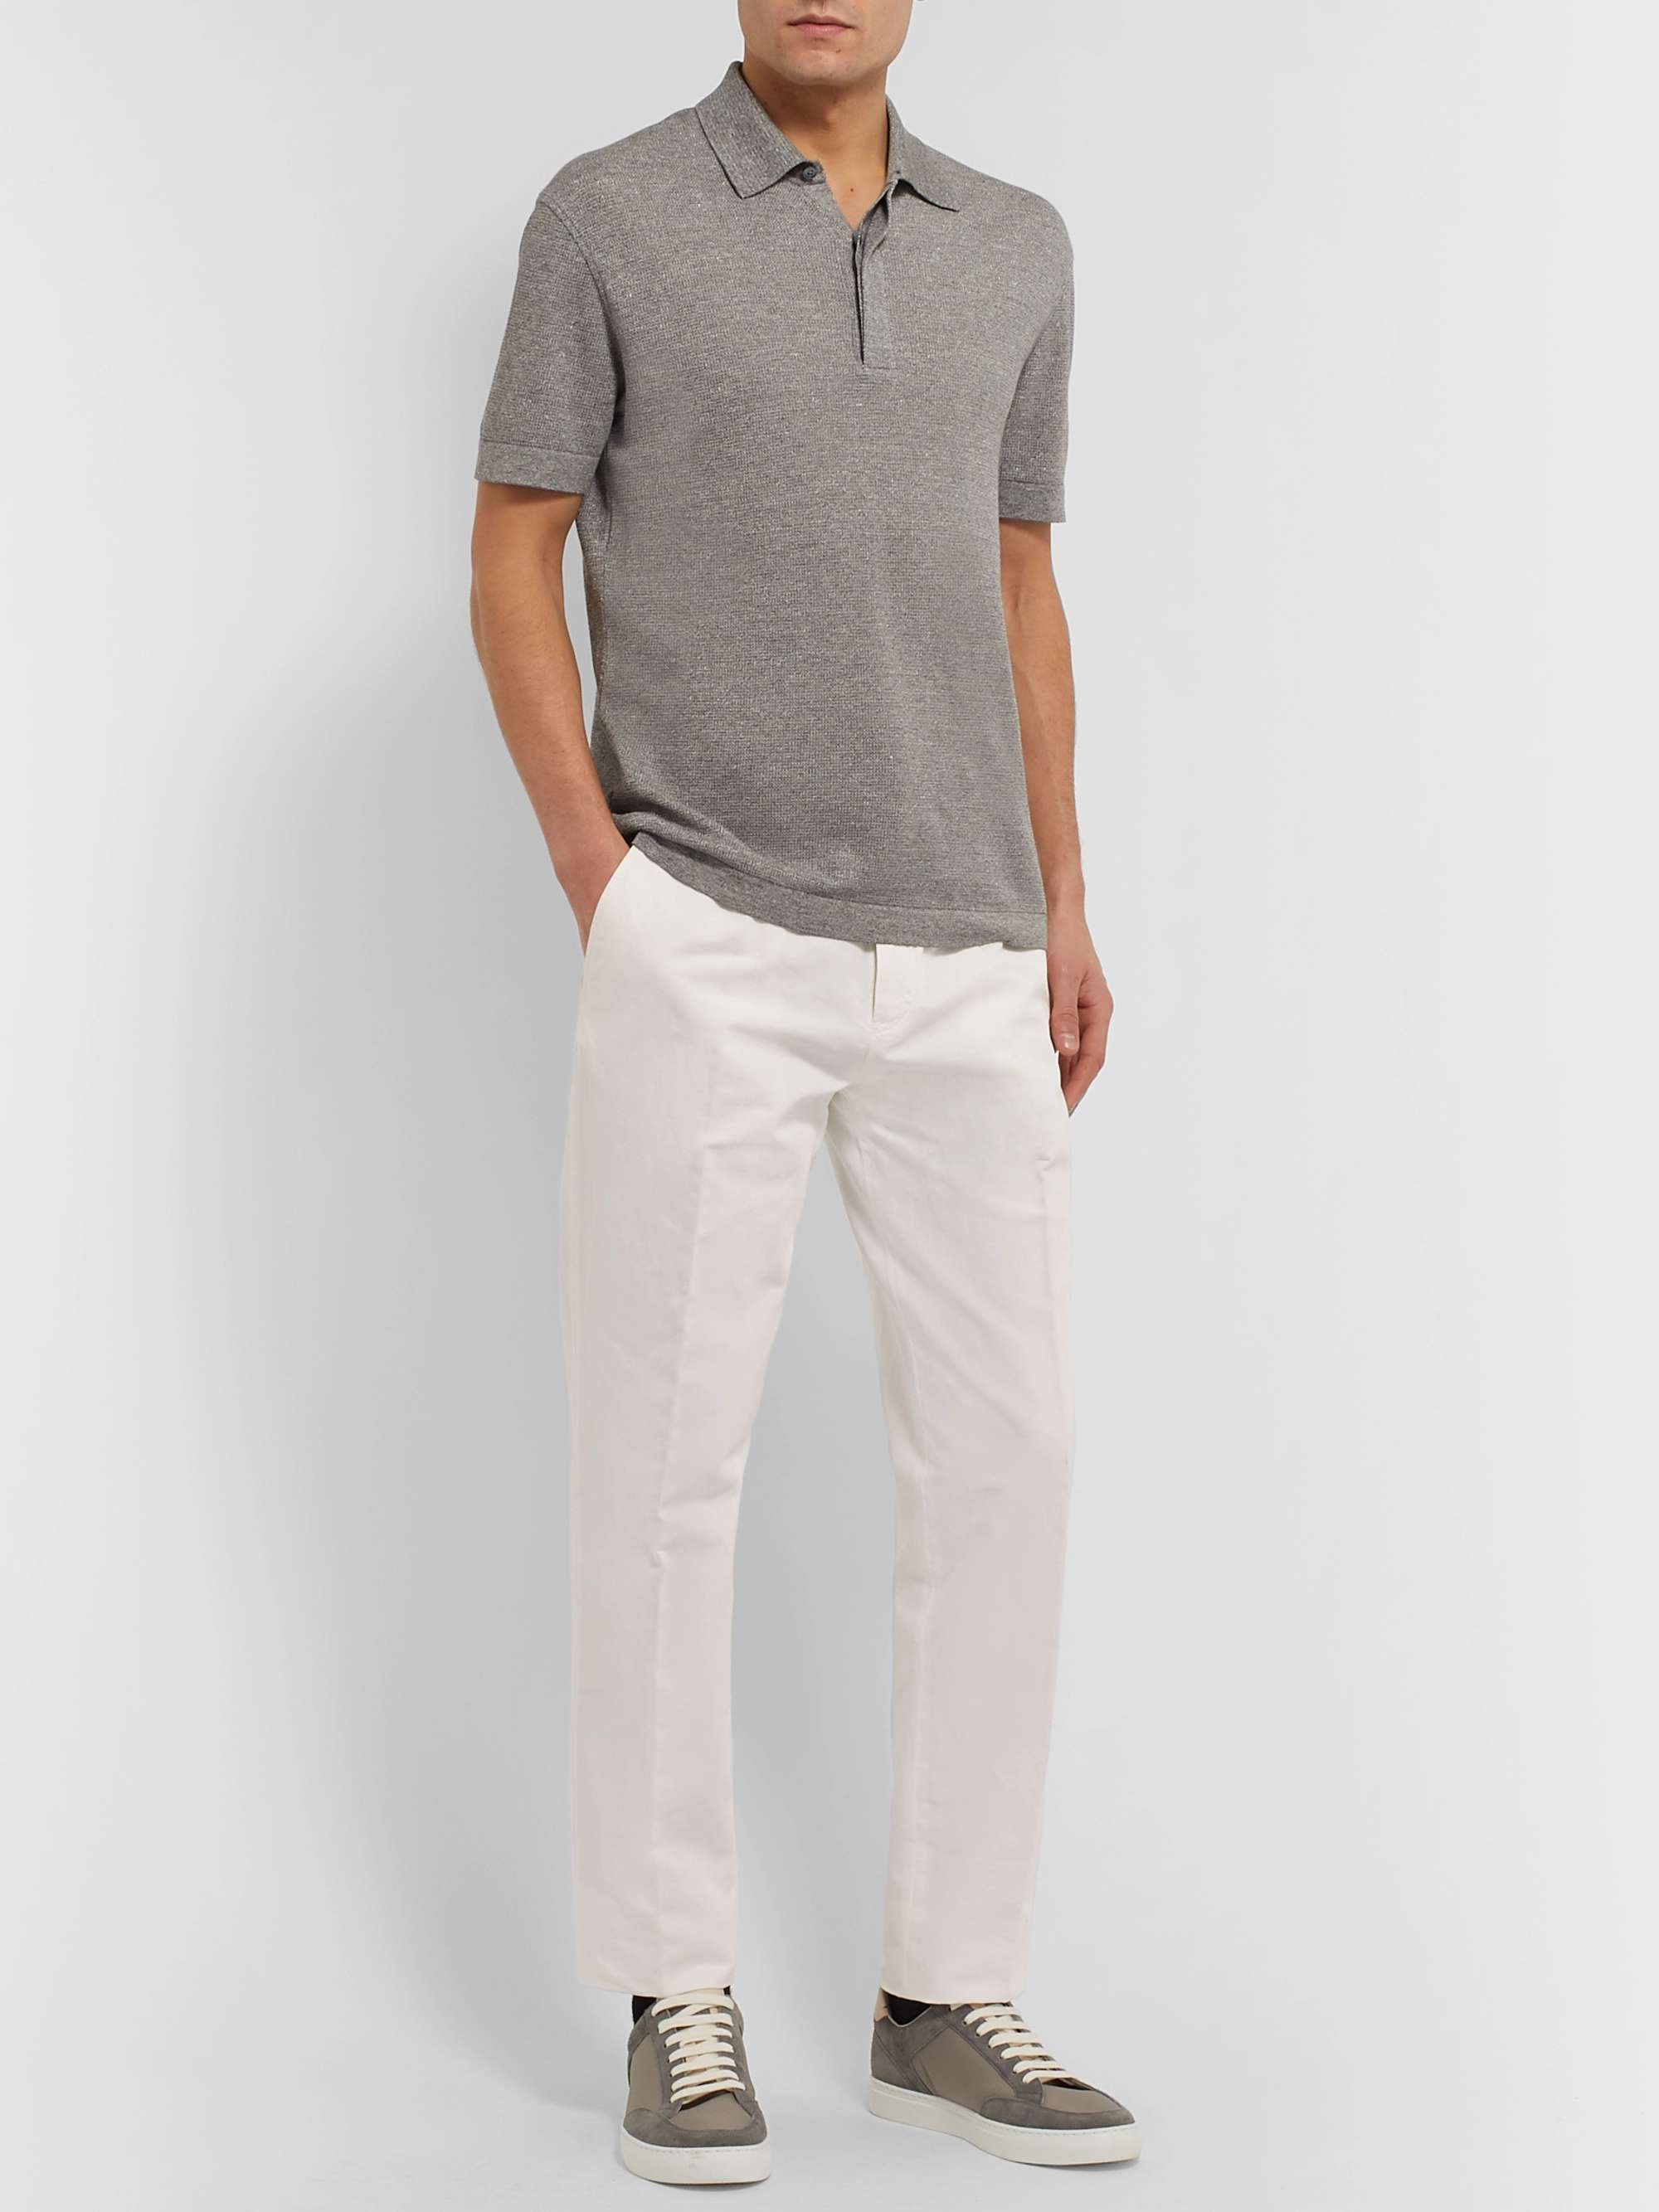 ZEGNA Cotton and Linen-Blend Trousers